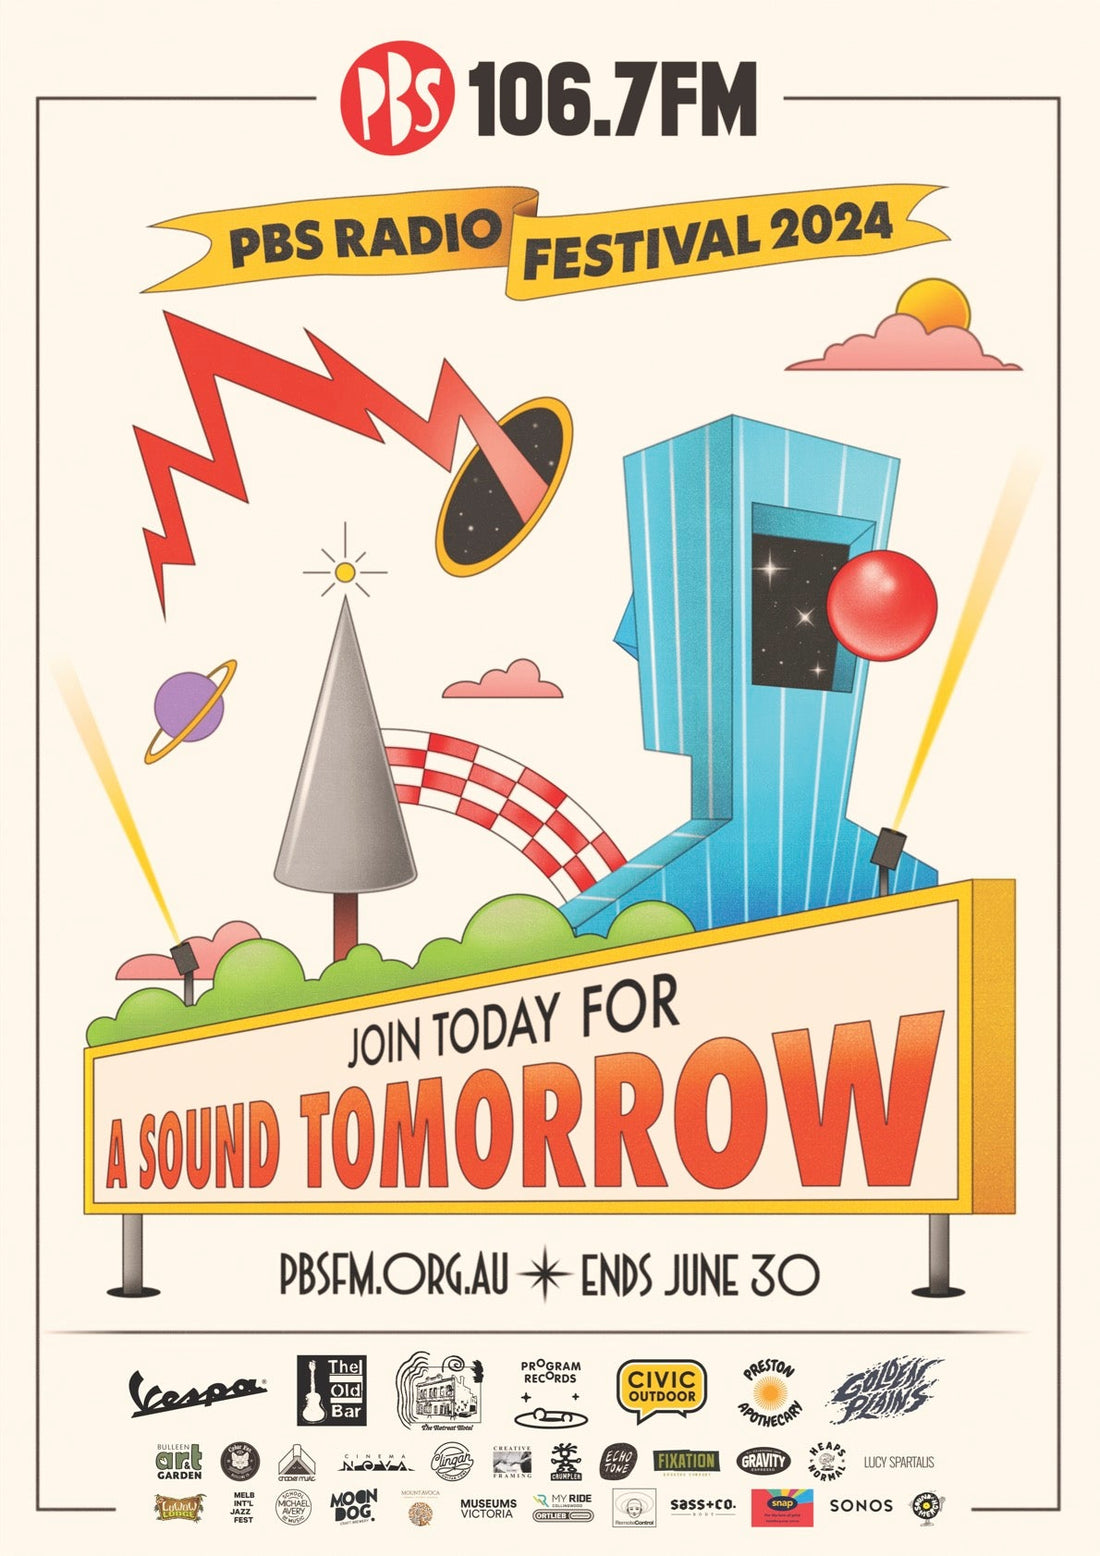 PBS RADIO FESTIVAL IS HERE AND WE ARE A MAJOR SPONSOR - Preston Apothecary